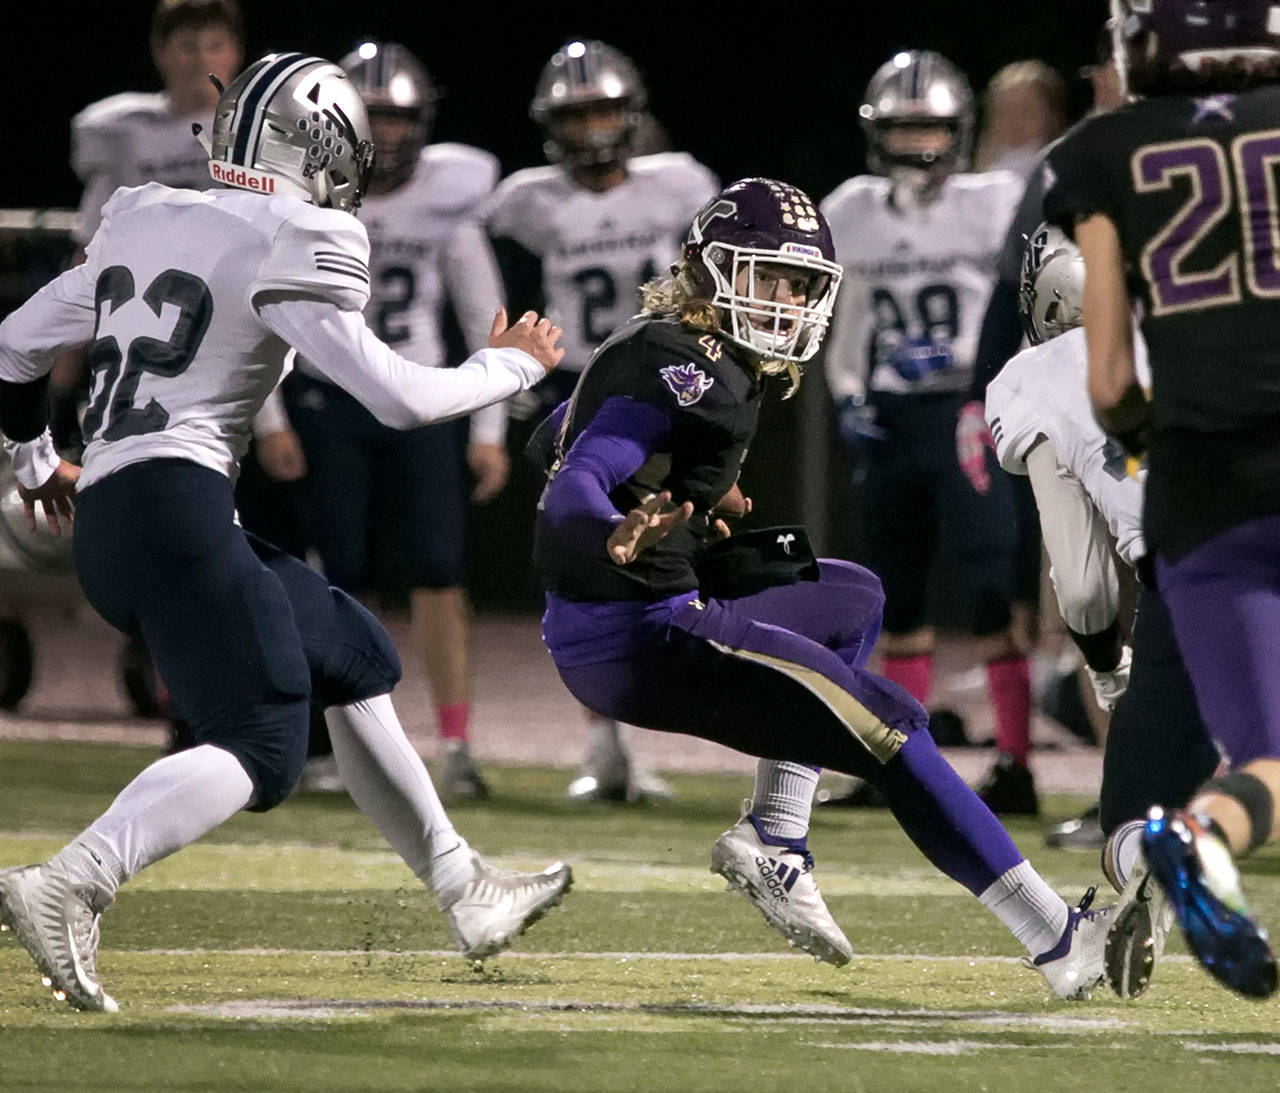 Lake Stevens’ Tre Long is chased out of the pocket by Glacier Peak’s Mitchell Harper on at Lake Stevens High School on Oct. 5. (Kevin Clark / The Herald)